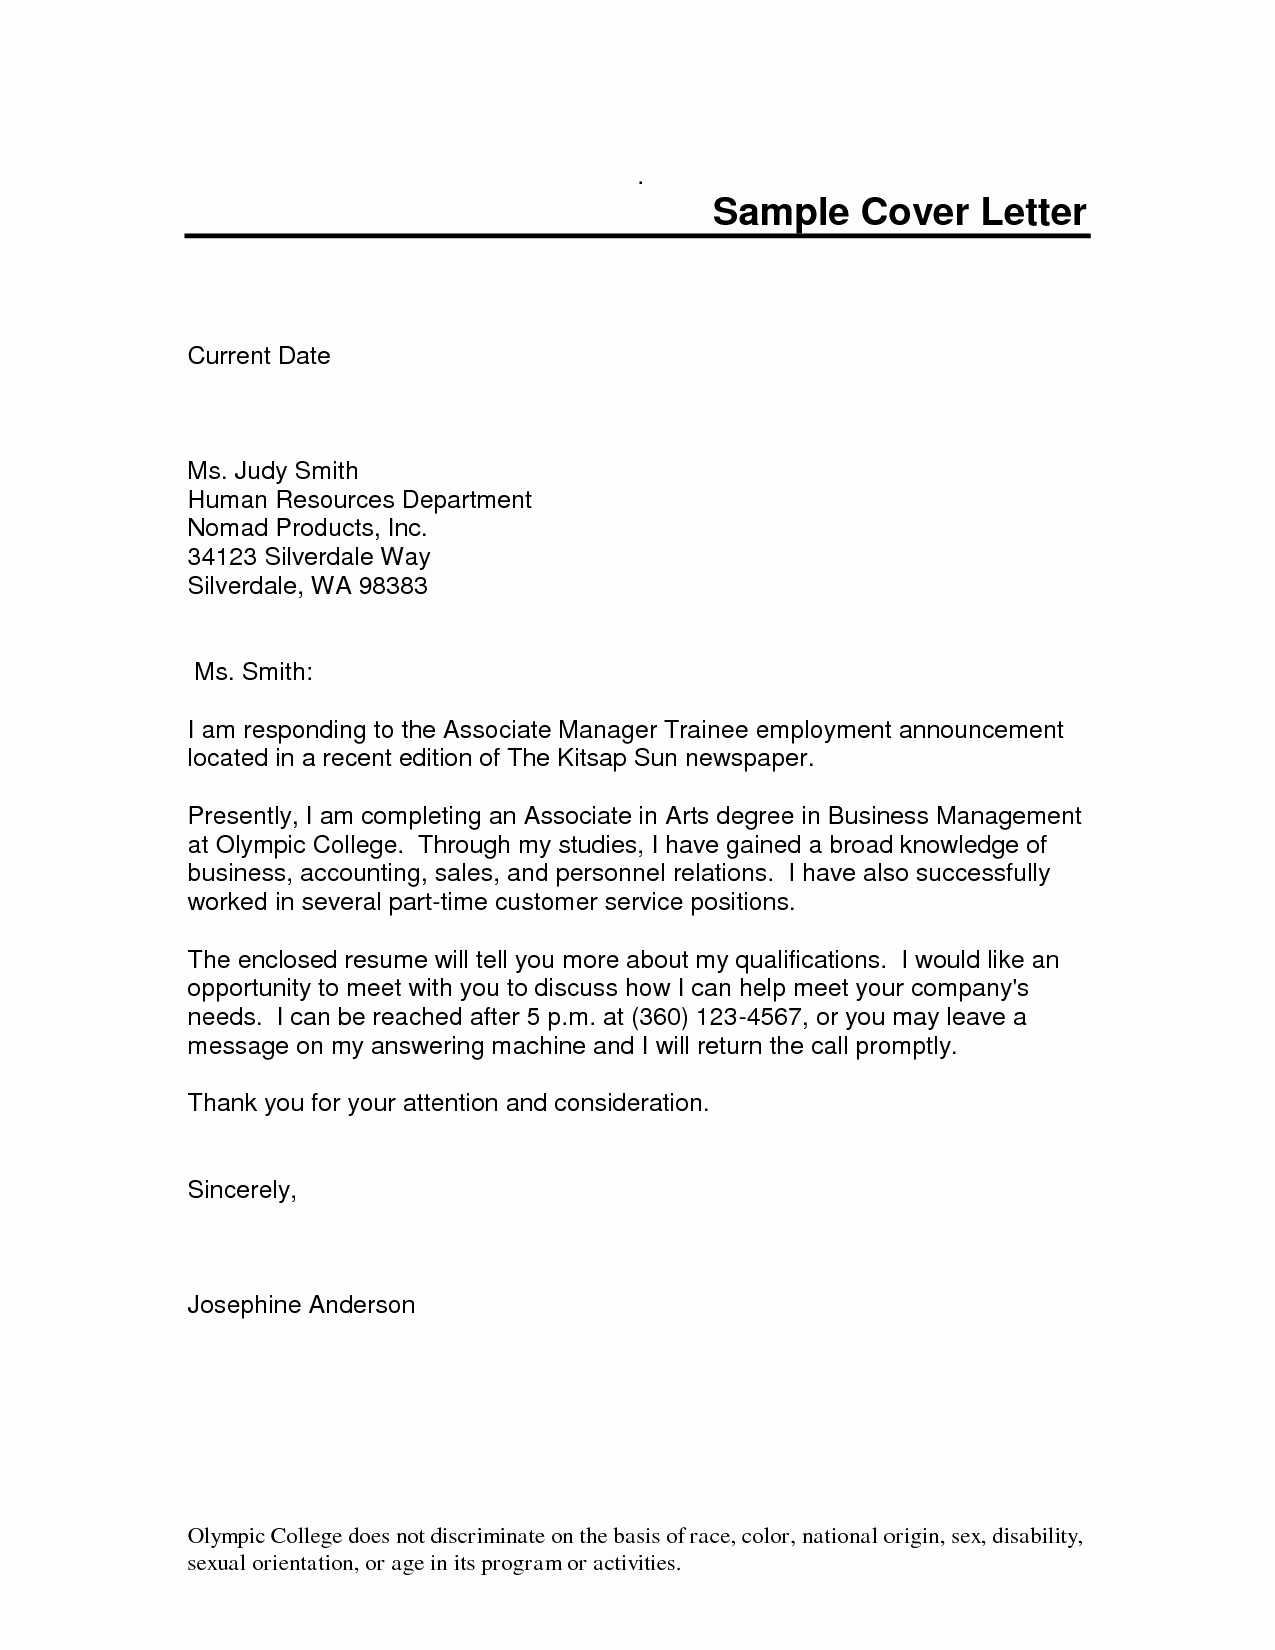 Microsoft Word Cover Letter Templates New Cover Letter Template Word